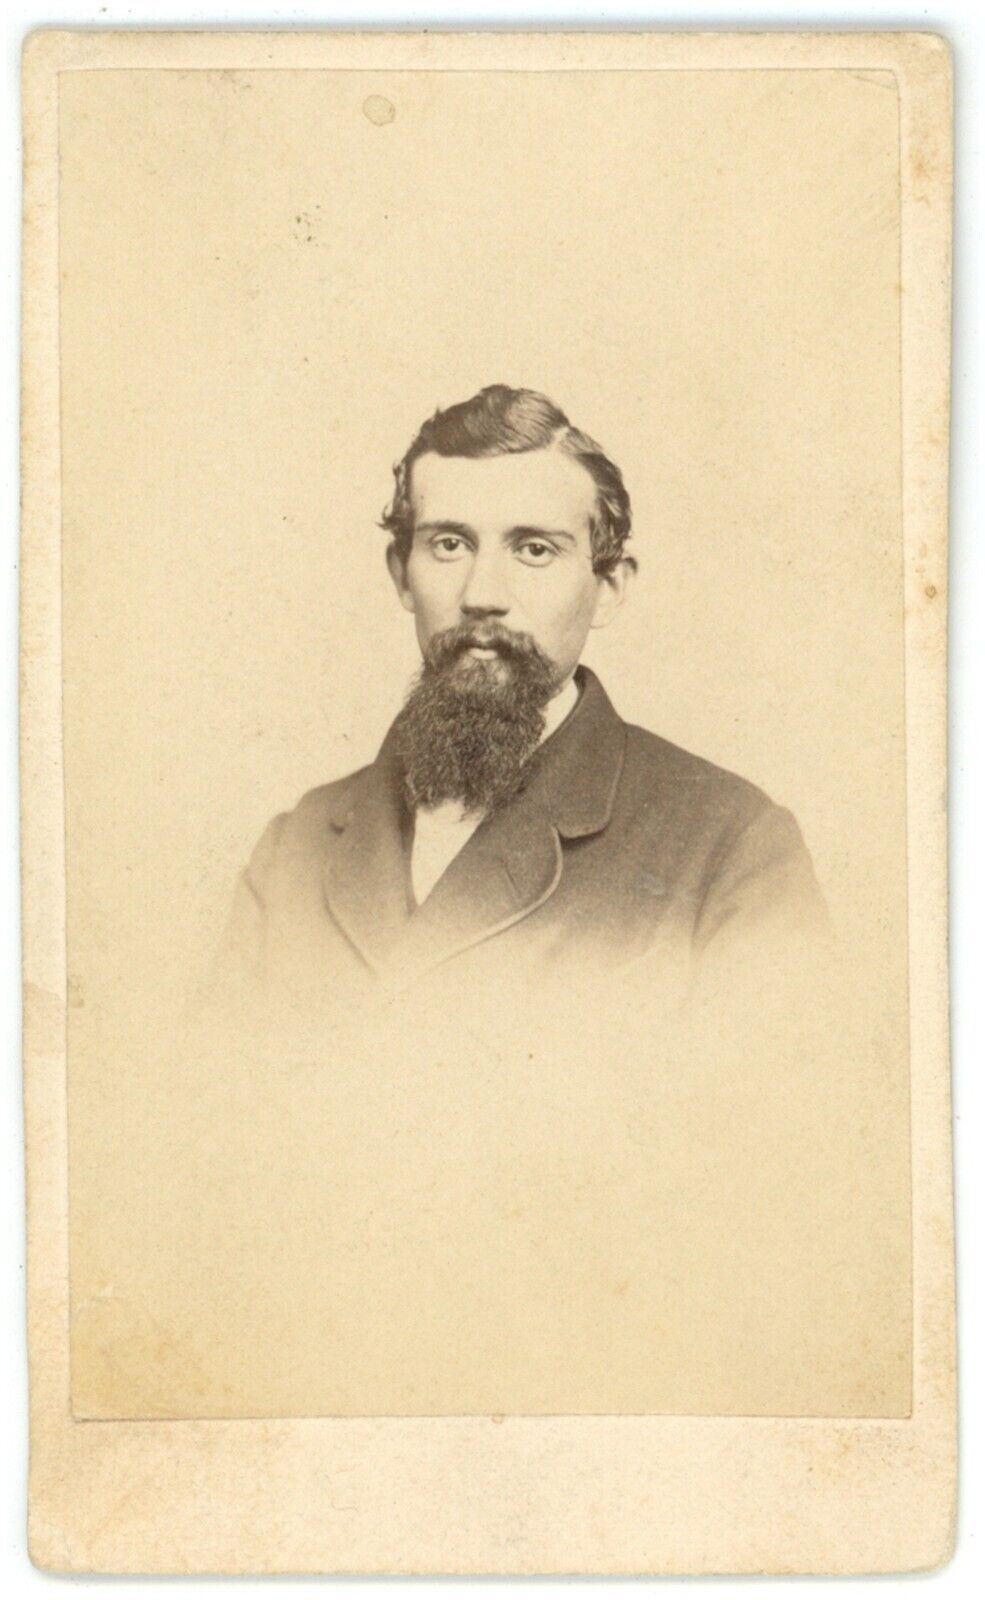 CIRCA 1870'S CDV Featuring Handsome Rugged Man With Goatee Beard Wearing Suit